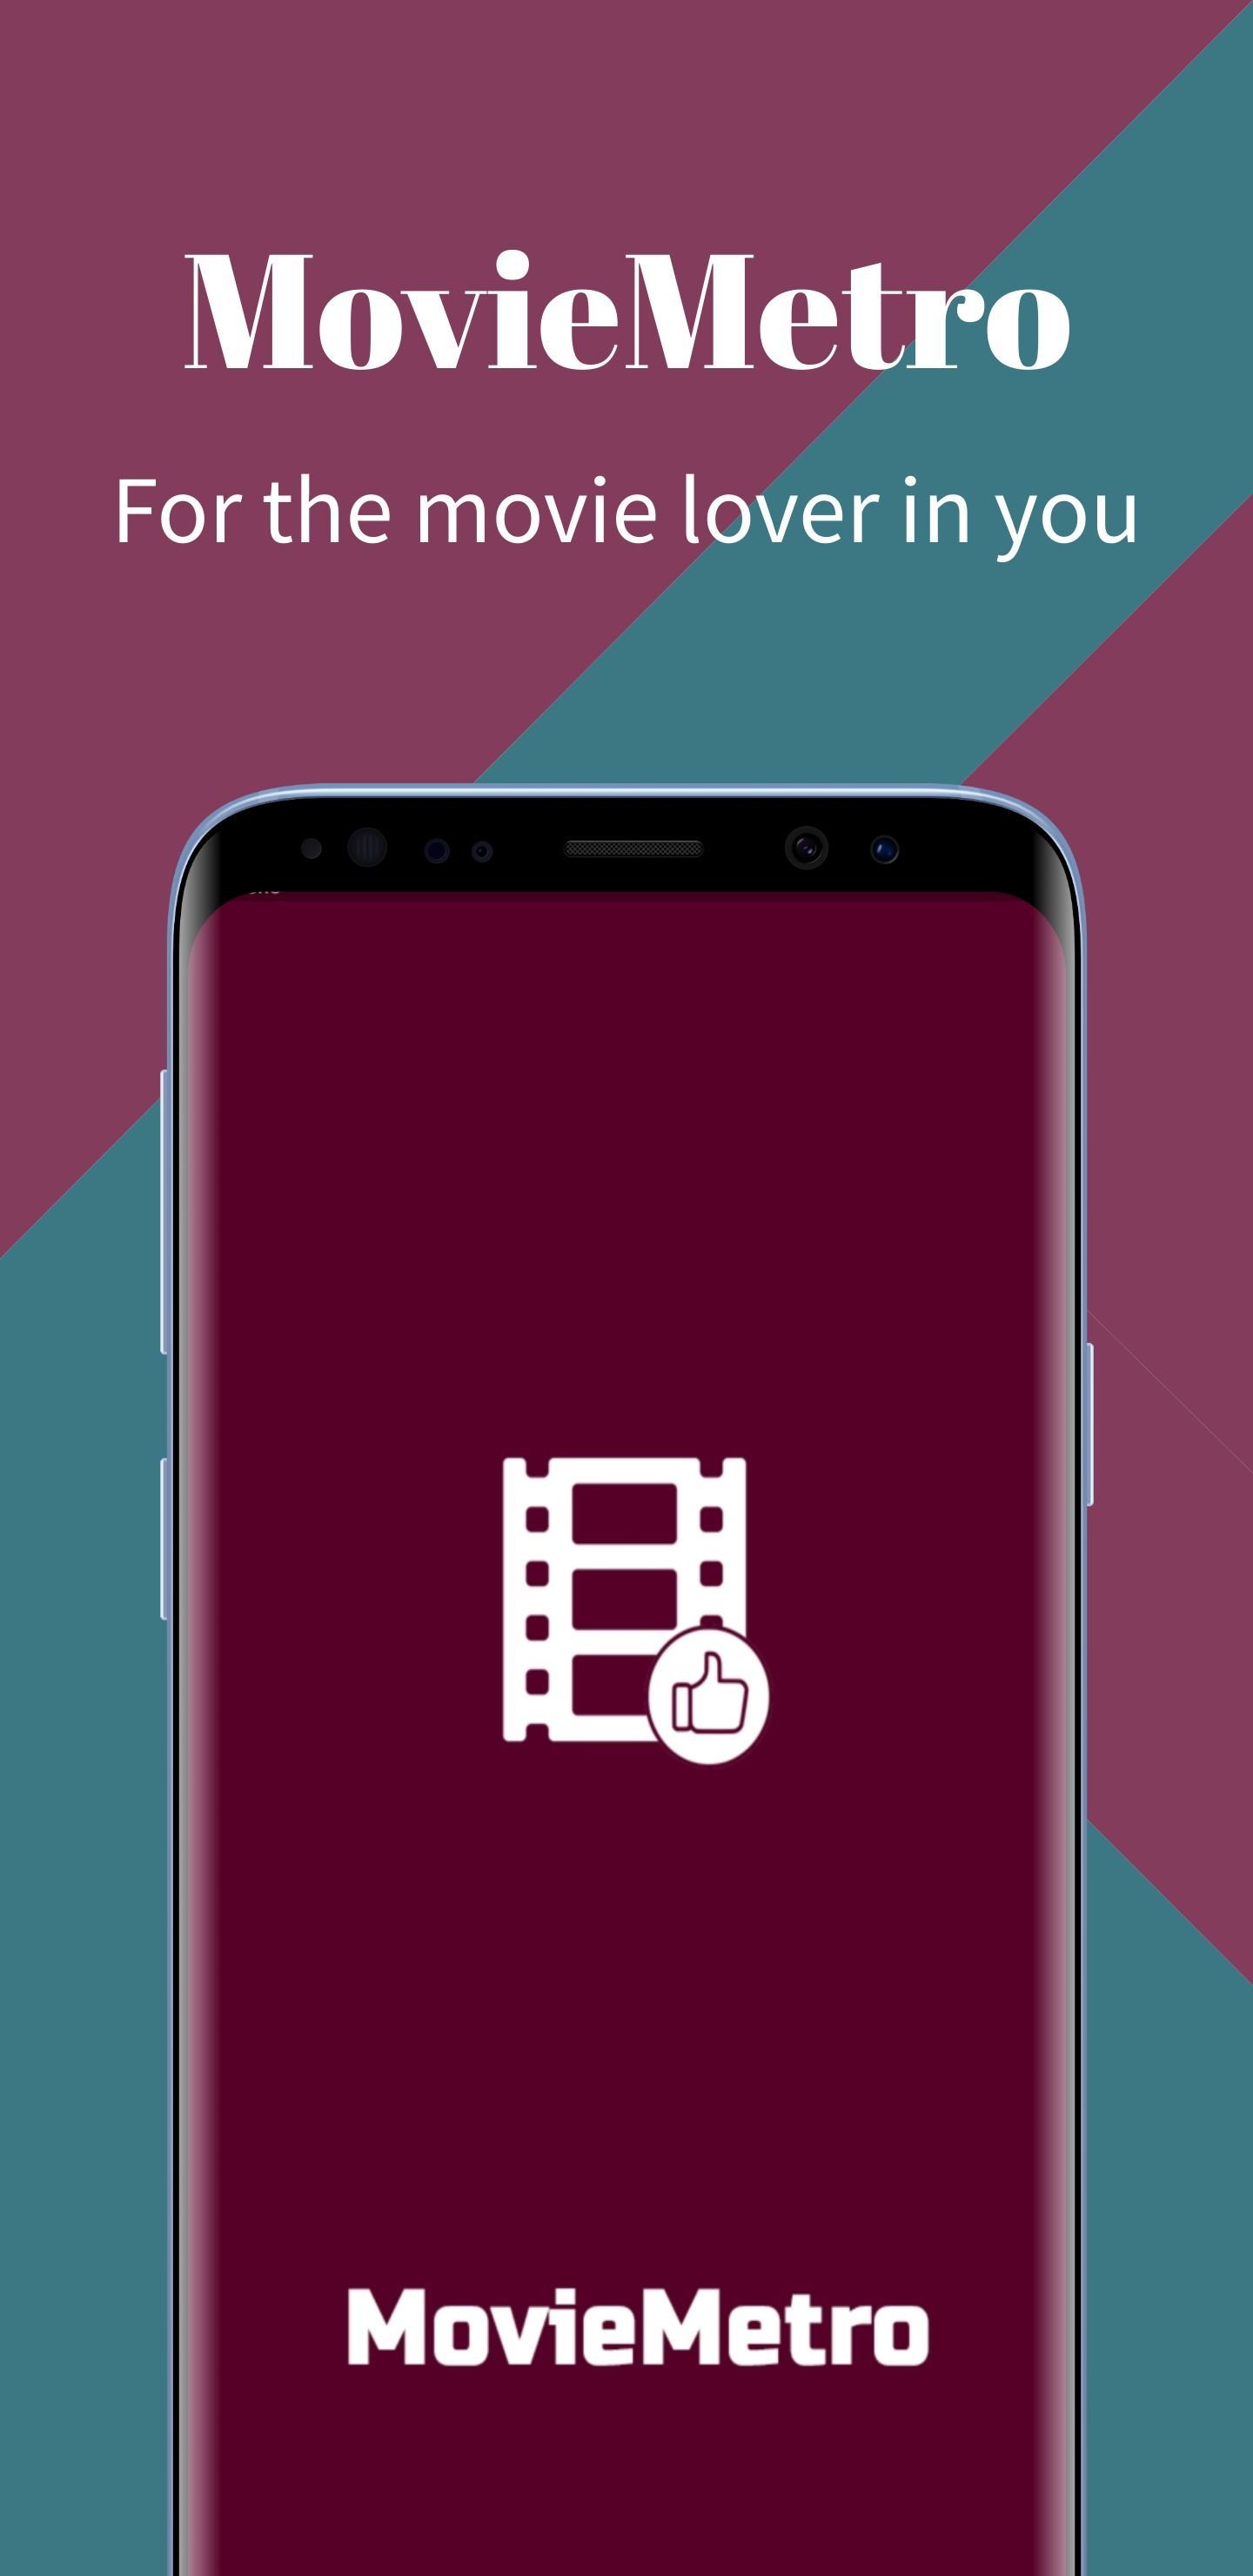 Samsung S9 Screenshot 27 template. Quickly edit fonts, text, colors, and more for free.